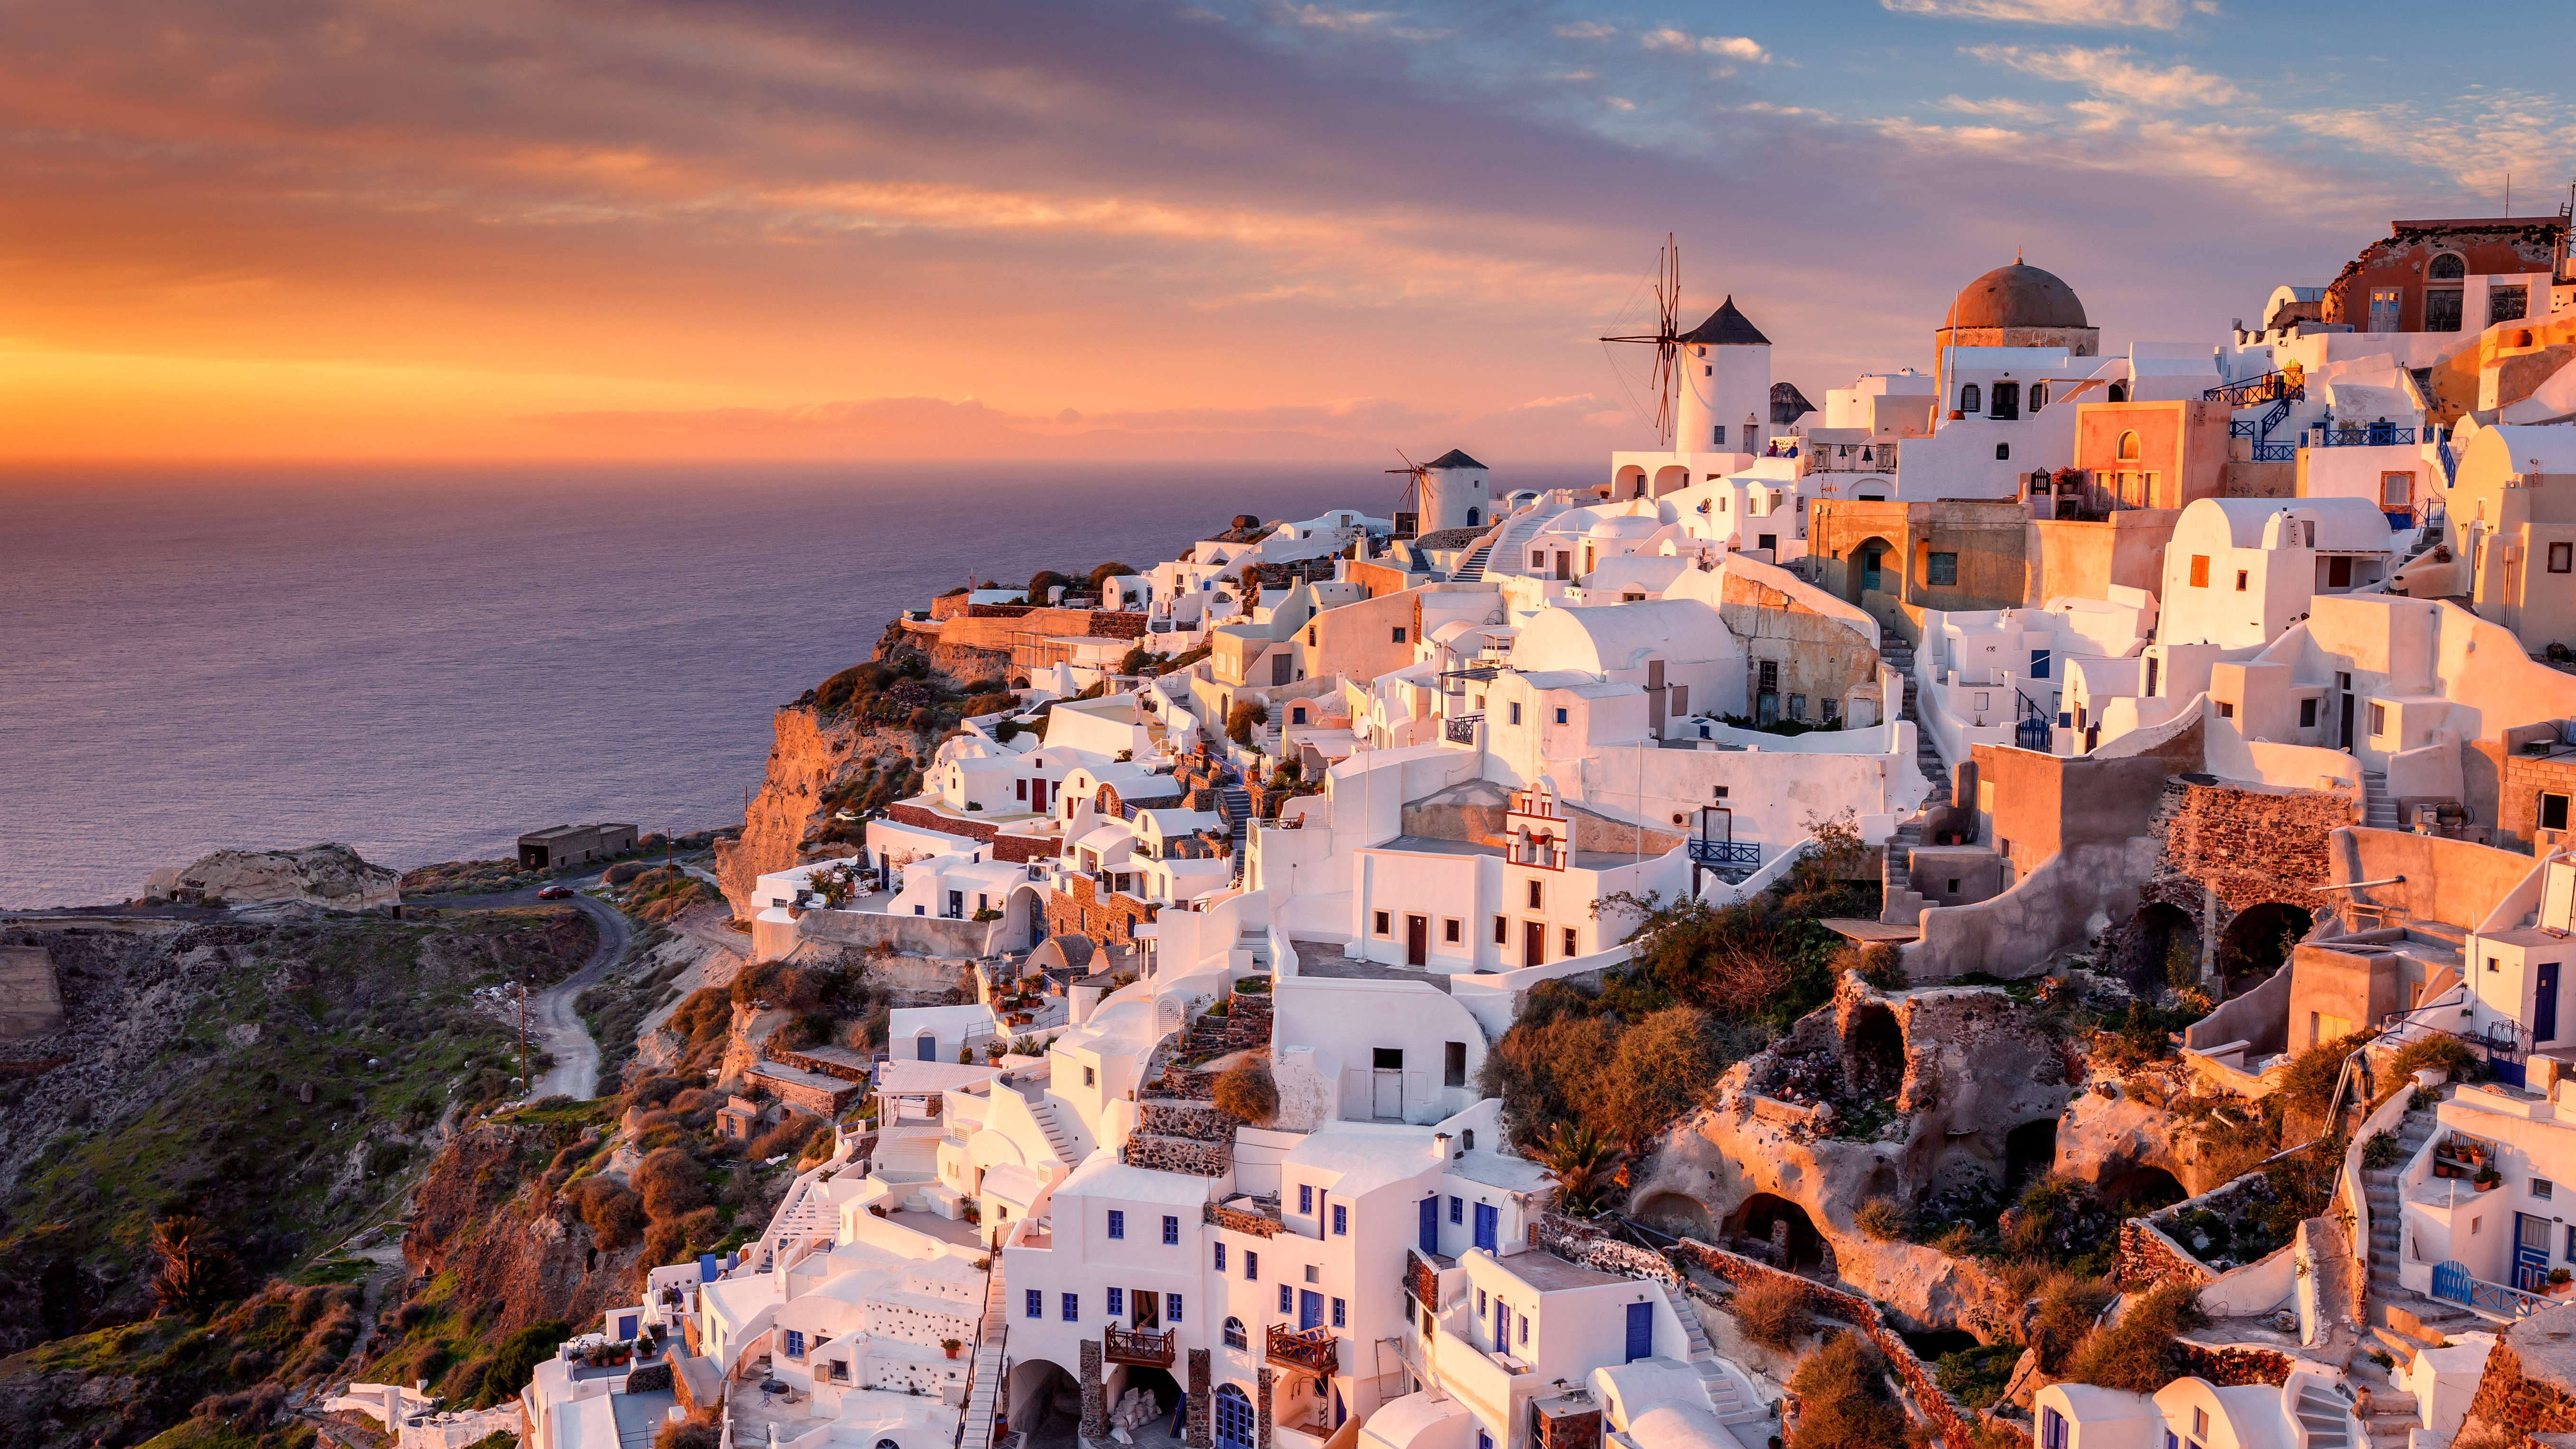 Santorini wine might save the Greek island from too much tourism ...